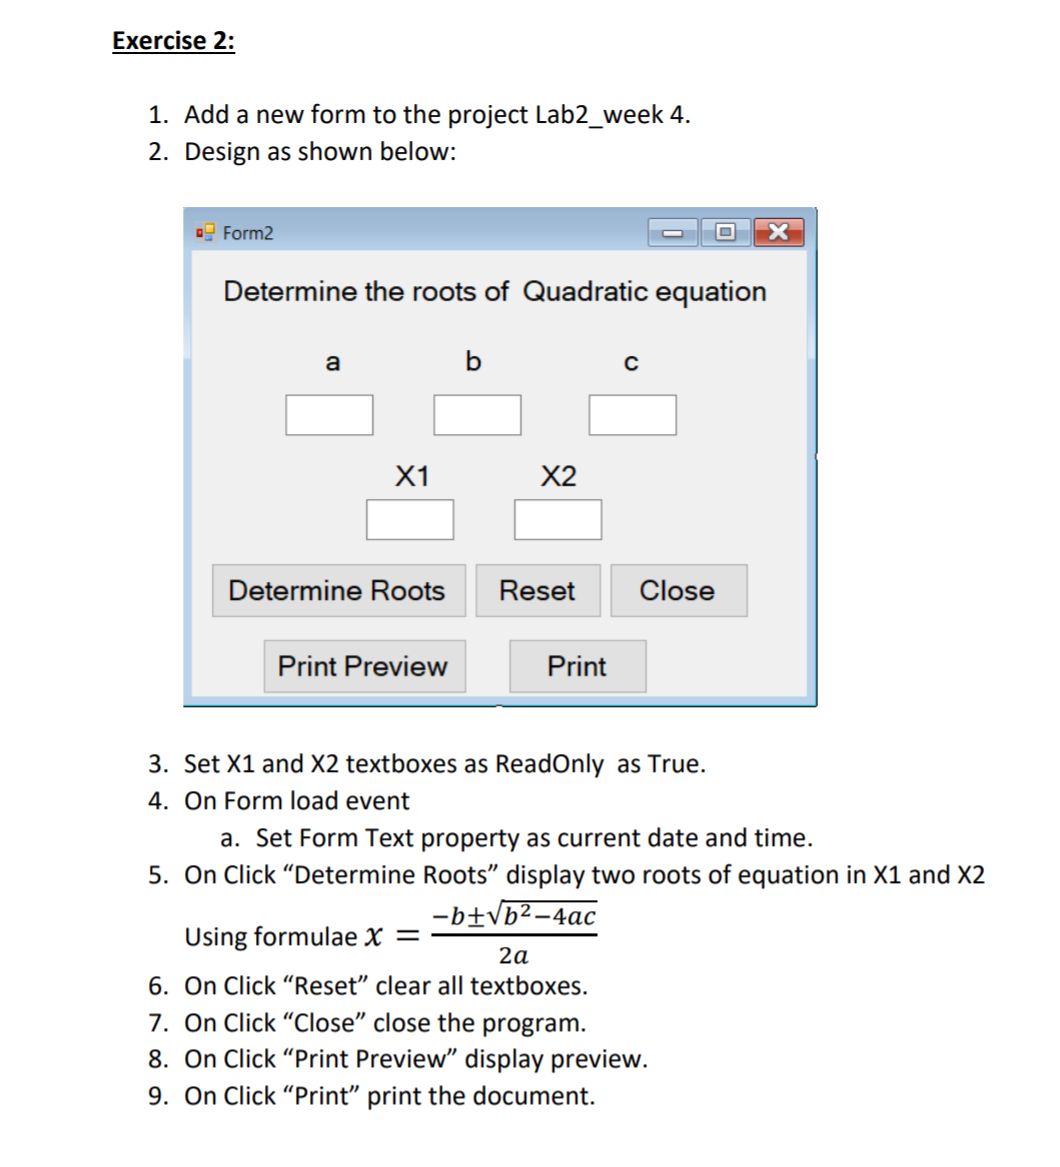 Exercise 2:
1. Add a new form to the project Lab2_week 4.
2. Design as shown below:
O Form2
Determine the roots of Quadratic equation
a
X1
X2
Determine Roots
Reset
Close
Print Preview
Print
3. Set X1 and X2 textboxes as ReadOnly as True.
4. On Form load event
a. Set Form Text property as current date and time.
5. On Click "Determine Roots" display two roots of equation
-b±Vb²-4ac
X2
Using formulae x =
2a
6. On Click "Reset" clear all textboxes.
7. On Click "Close" close the program.
8. On Click "Print Preview" display preview.
9. On Click "Print" print the document.
